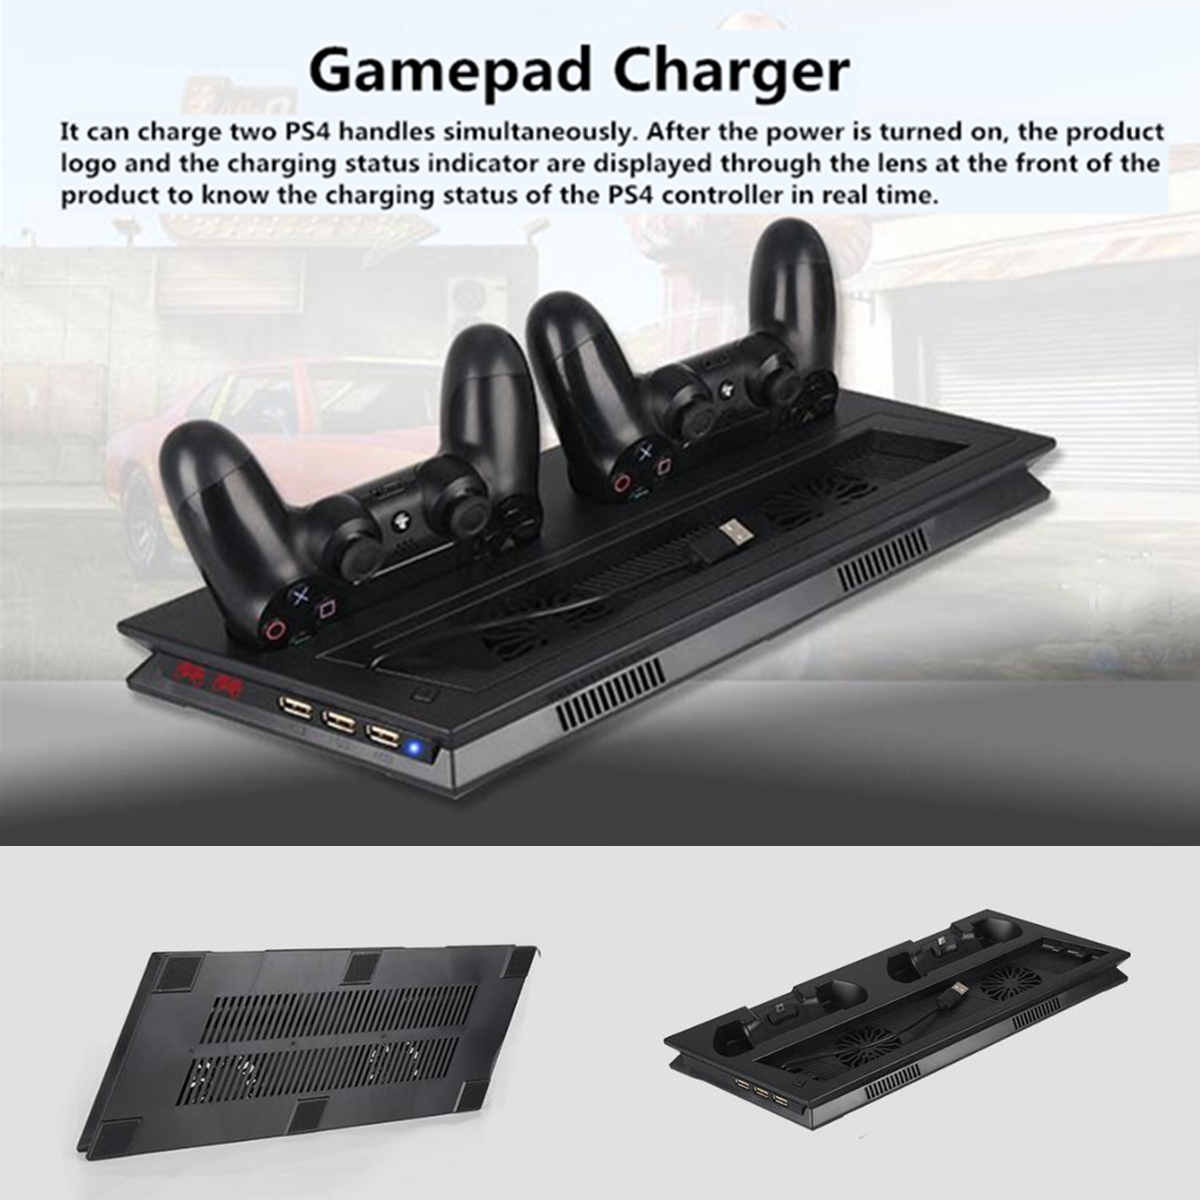 LED Charger Station Stand Charging Dock Cooling Fan for Sony Playstation 4 PS4 PRO Slim Game Console Gamepad 93